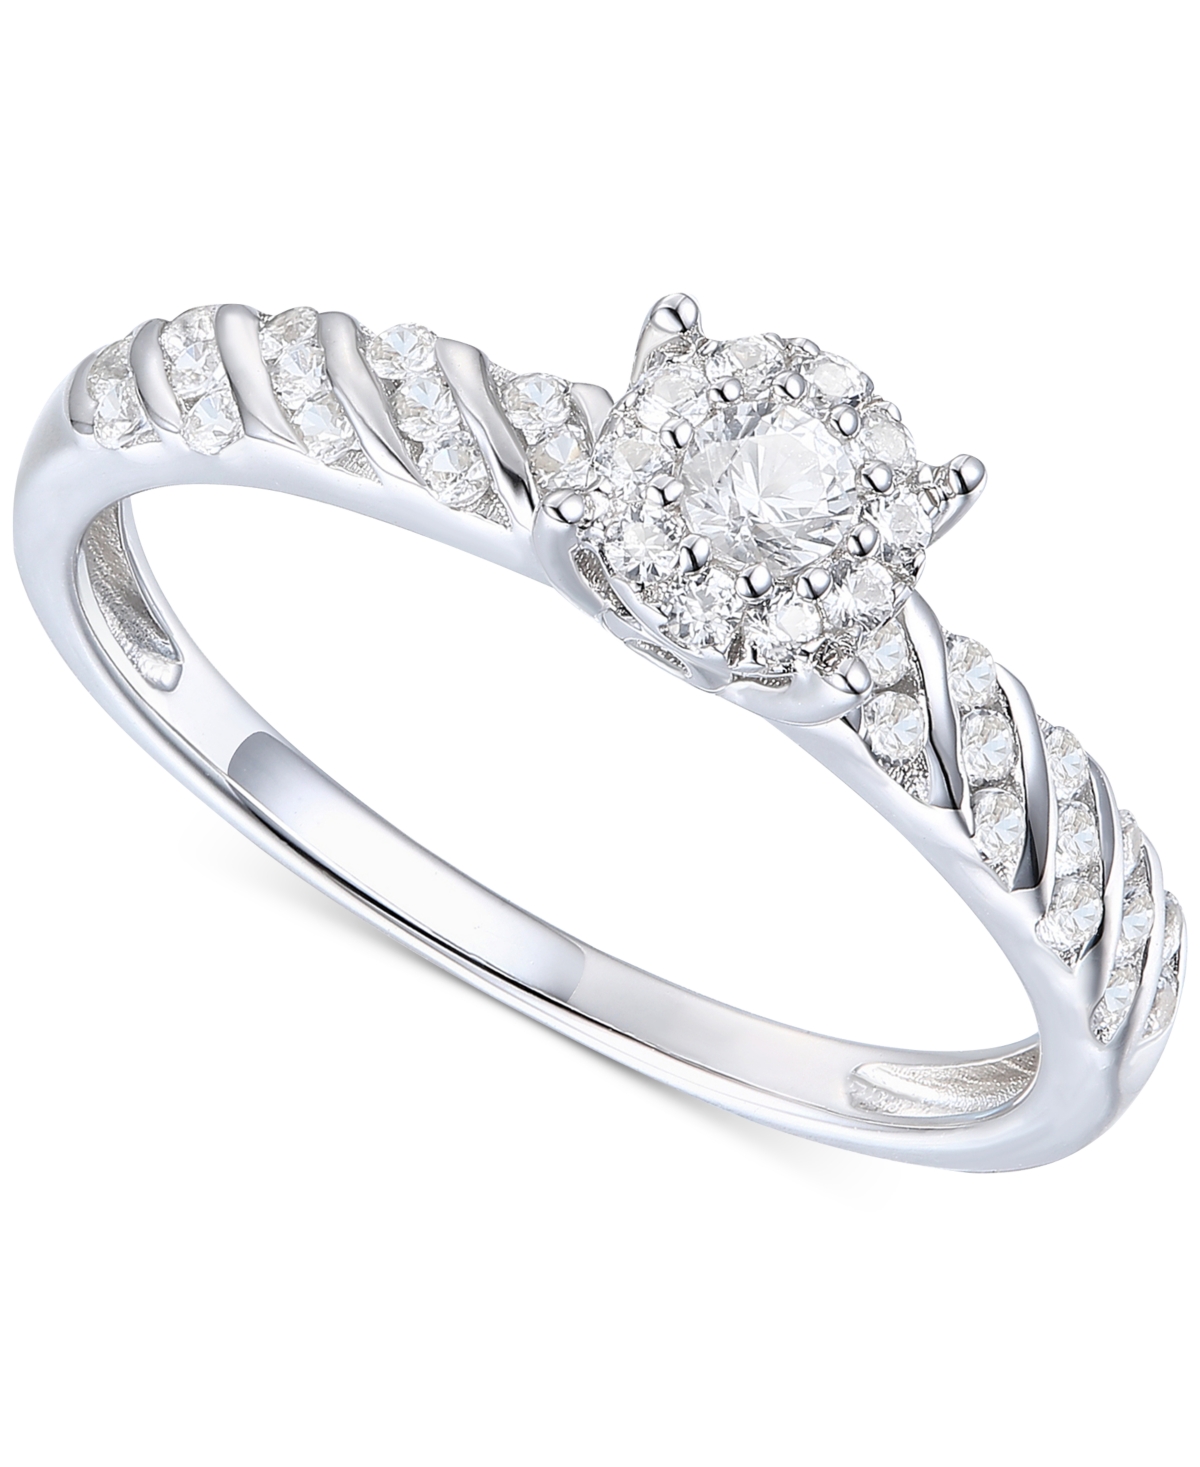 Diamond Halo Cluster Ring (1/3 ct. t.w.) in Sterling Silver - Sterling Silver